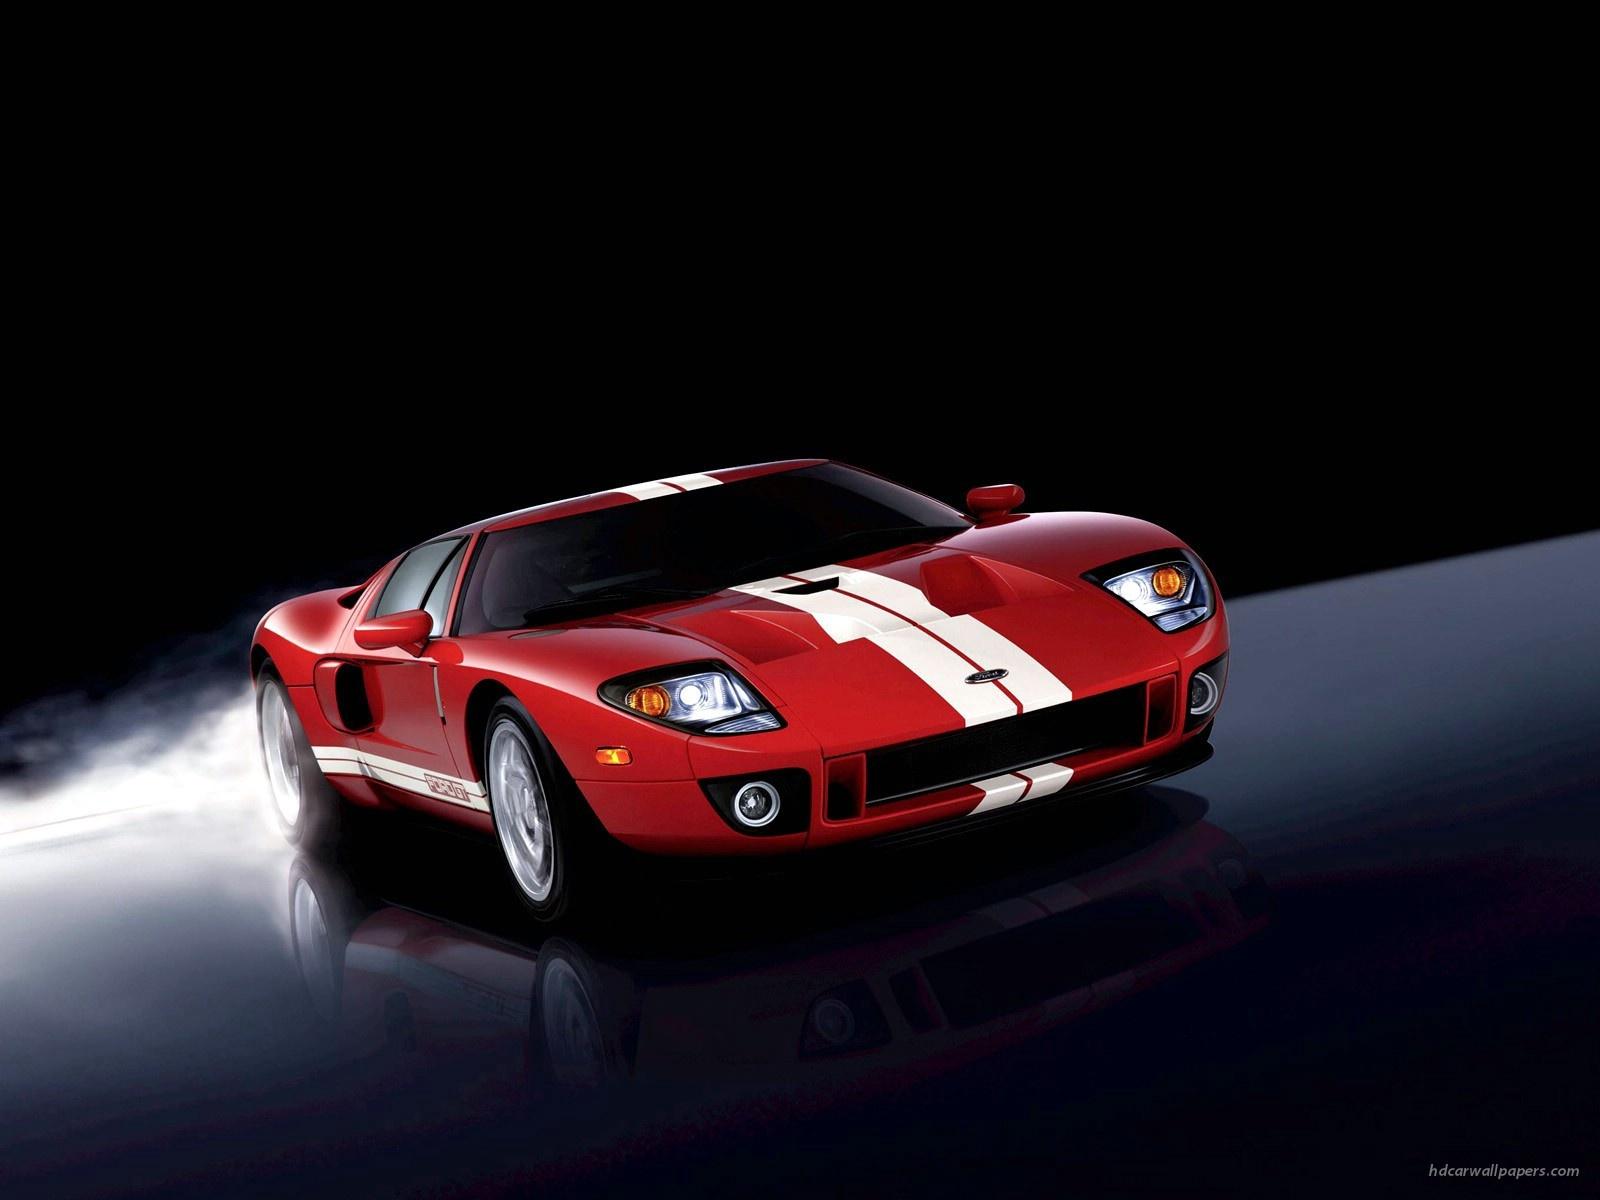 Ford GT 2 Wallpaper in jpg format for free download